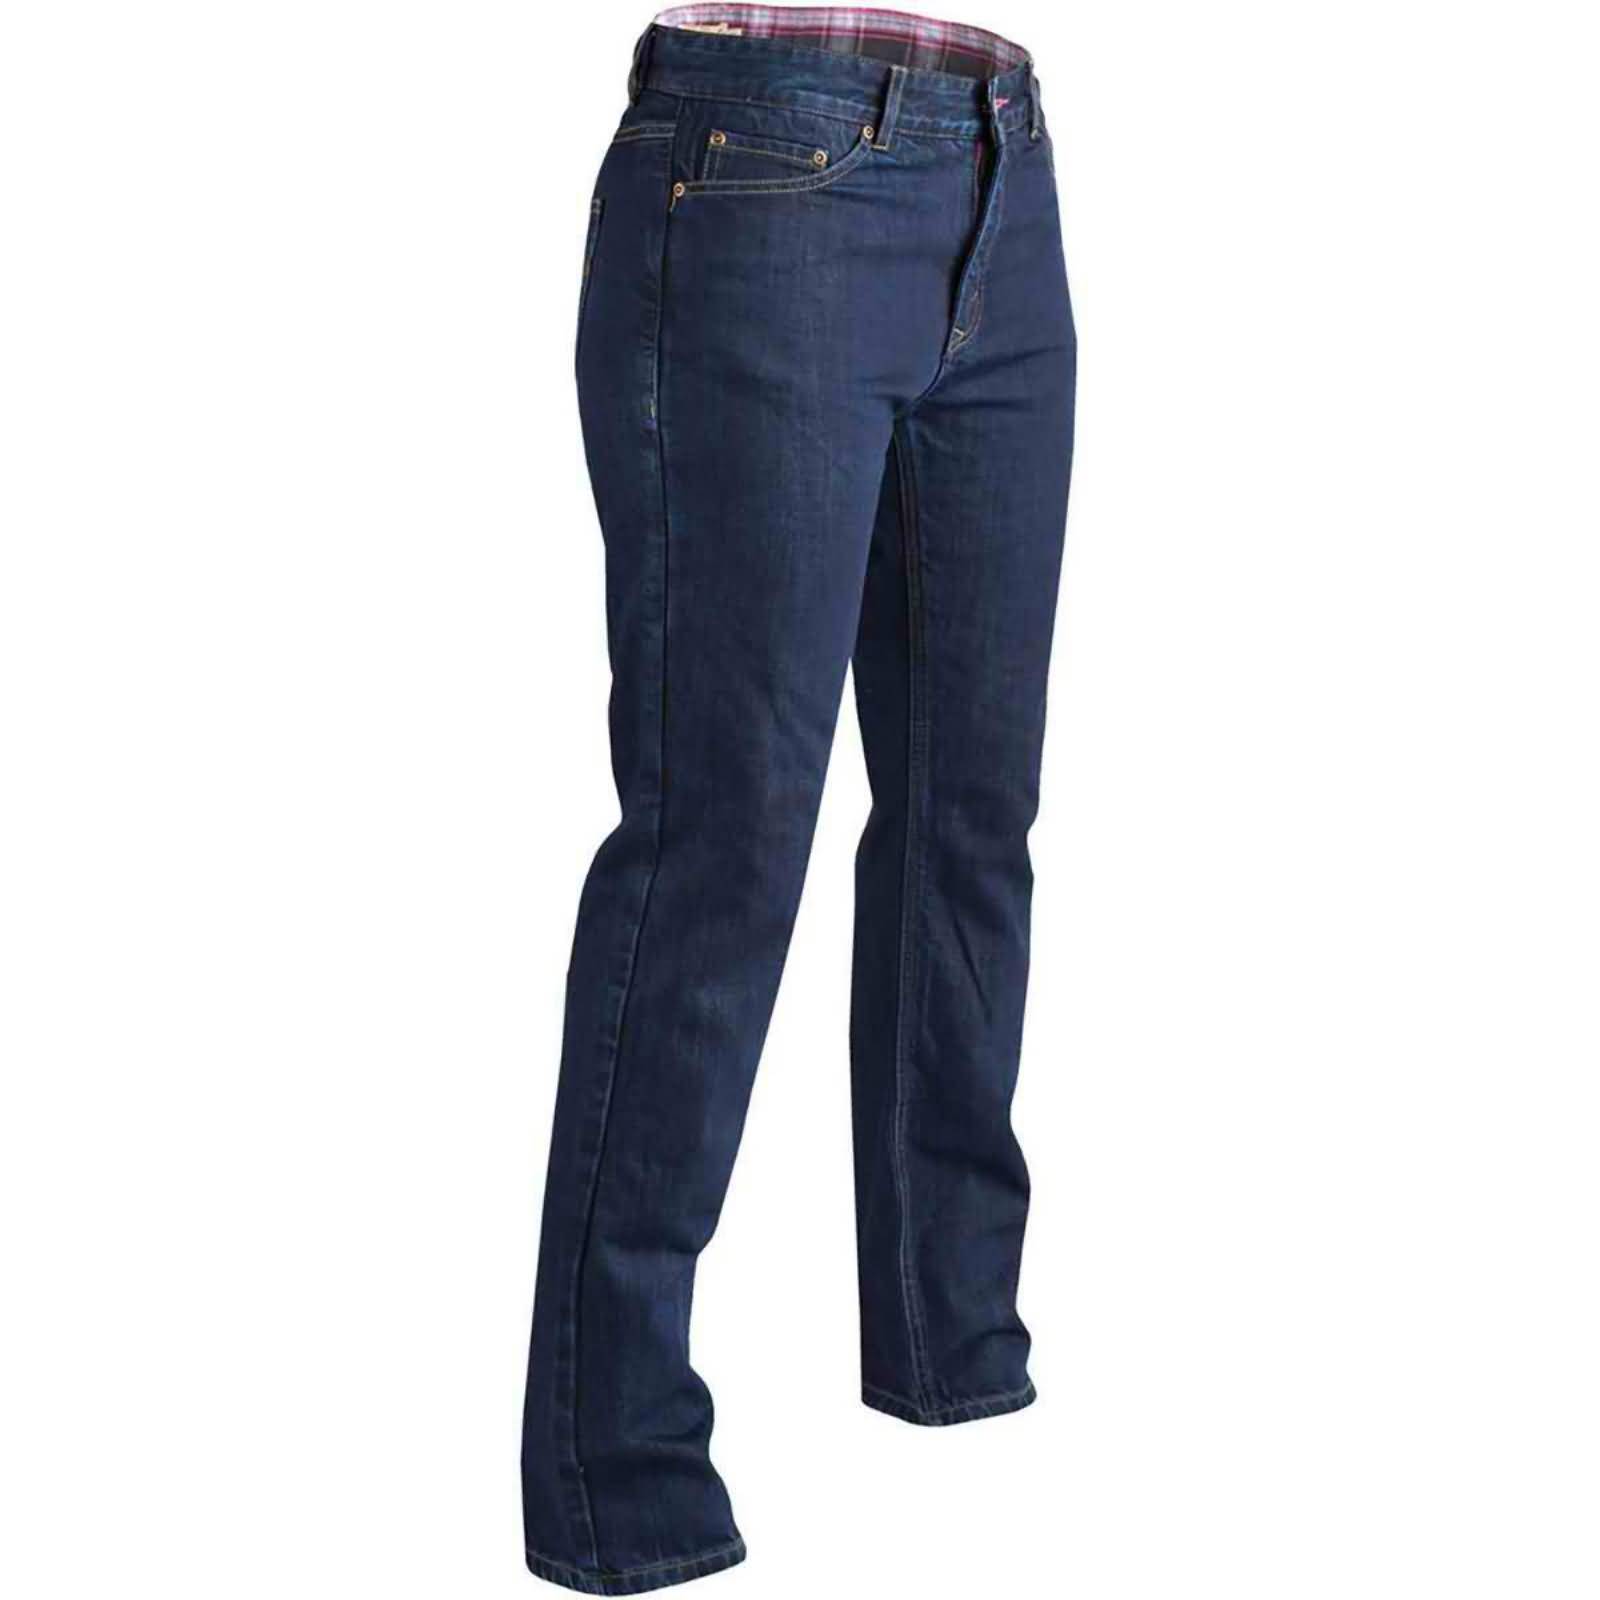 Deal of the Week: Up to 75% Off Women's Motorcycle Jeans & Pants